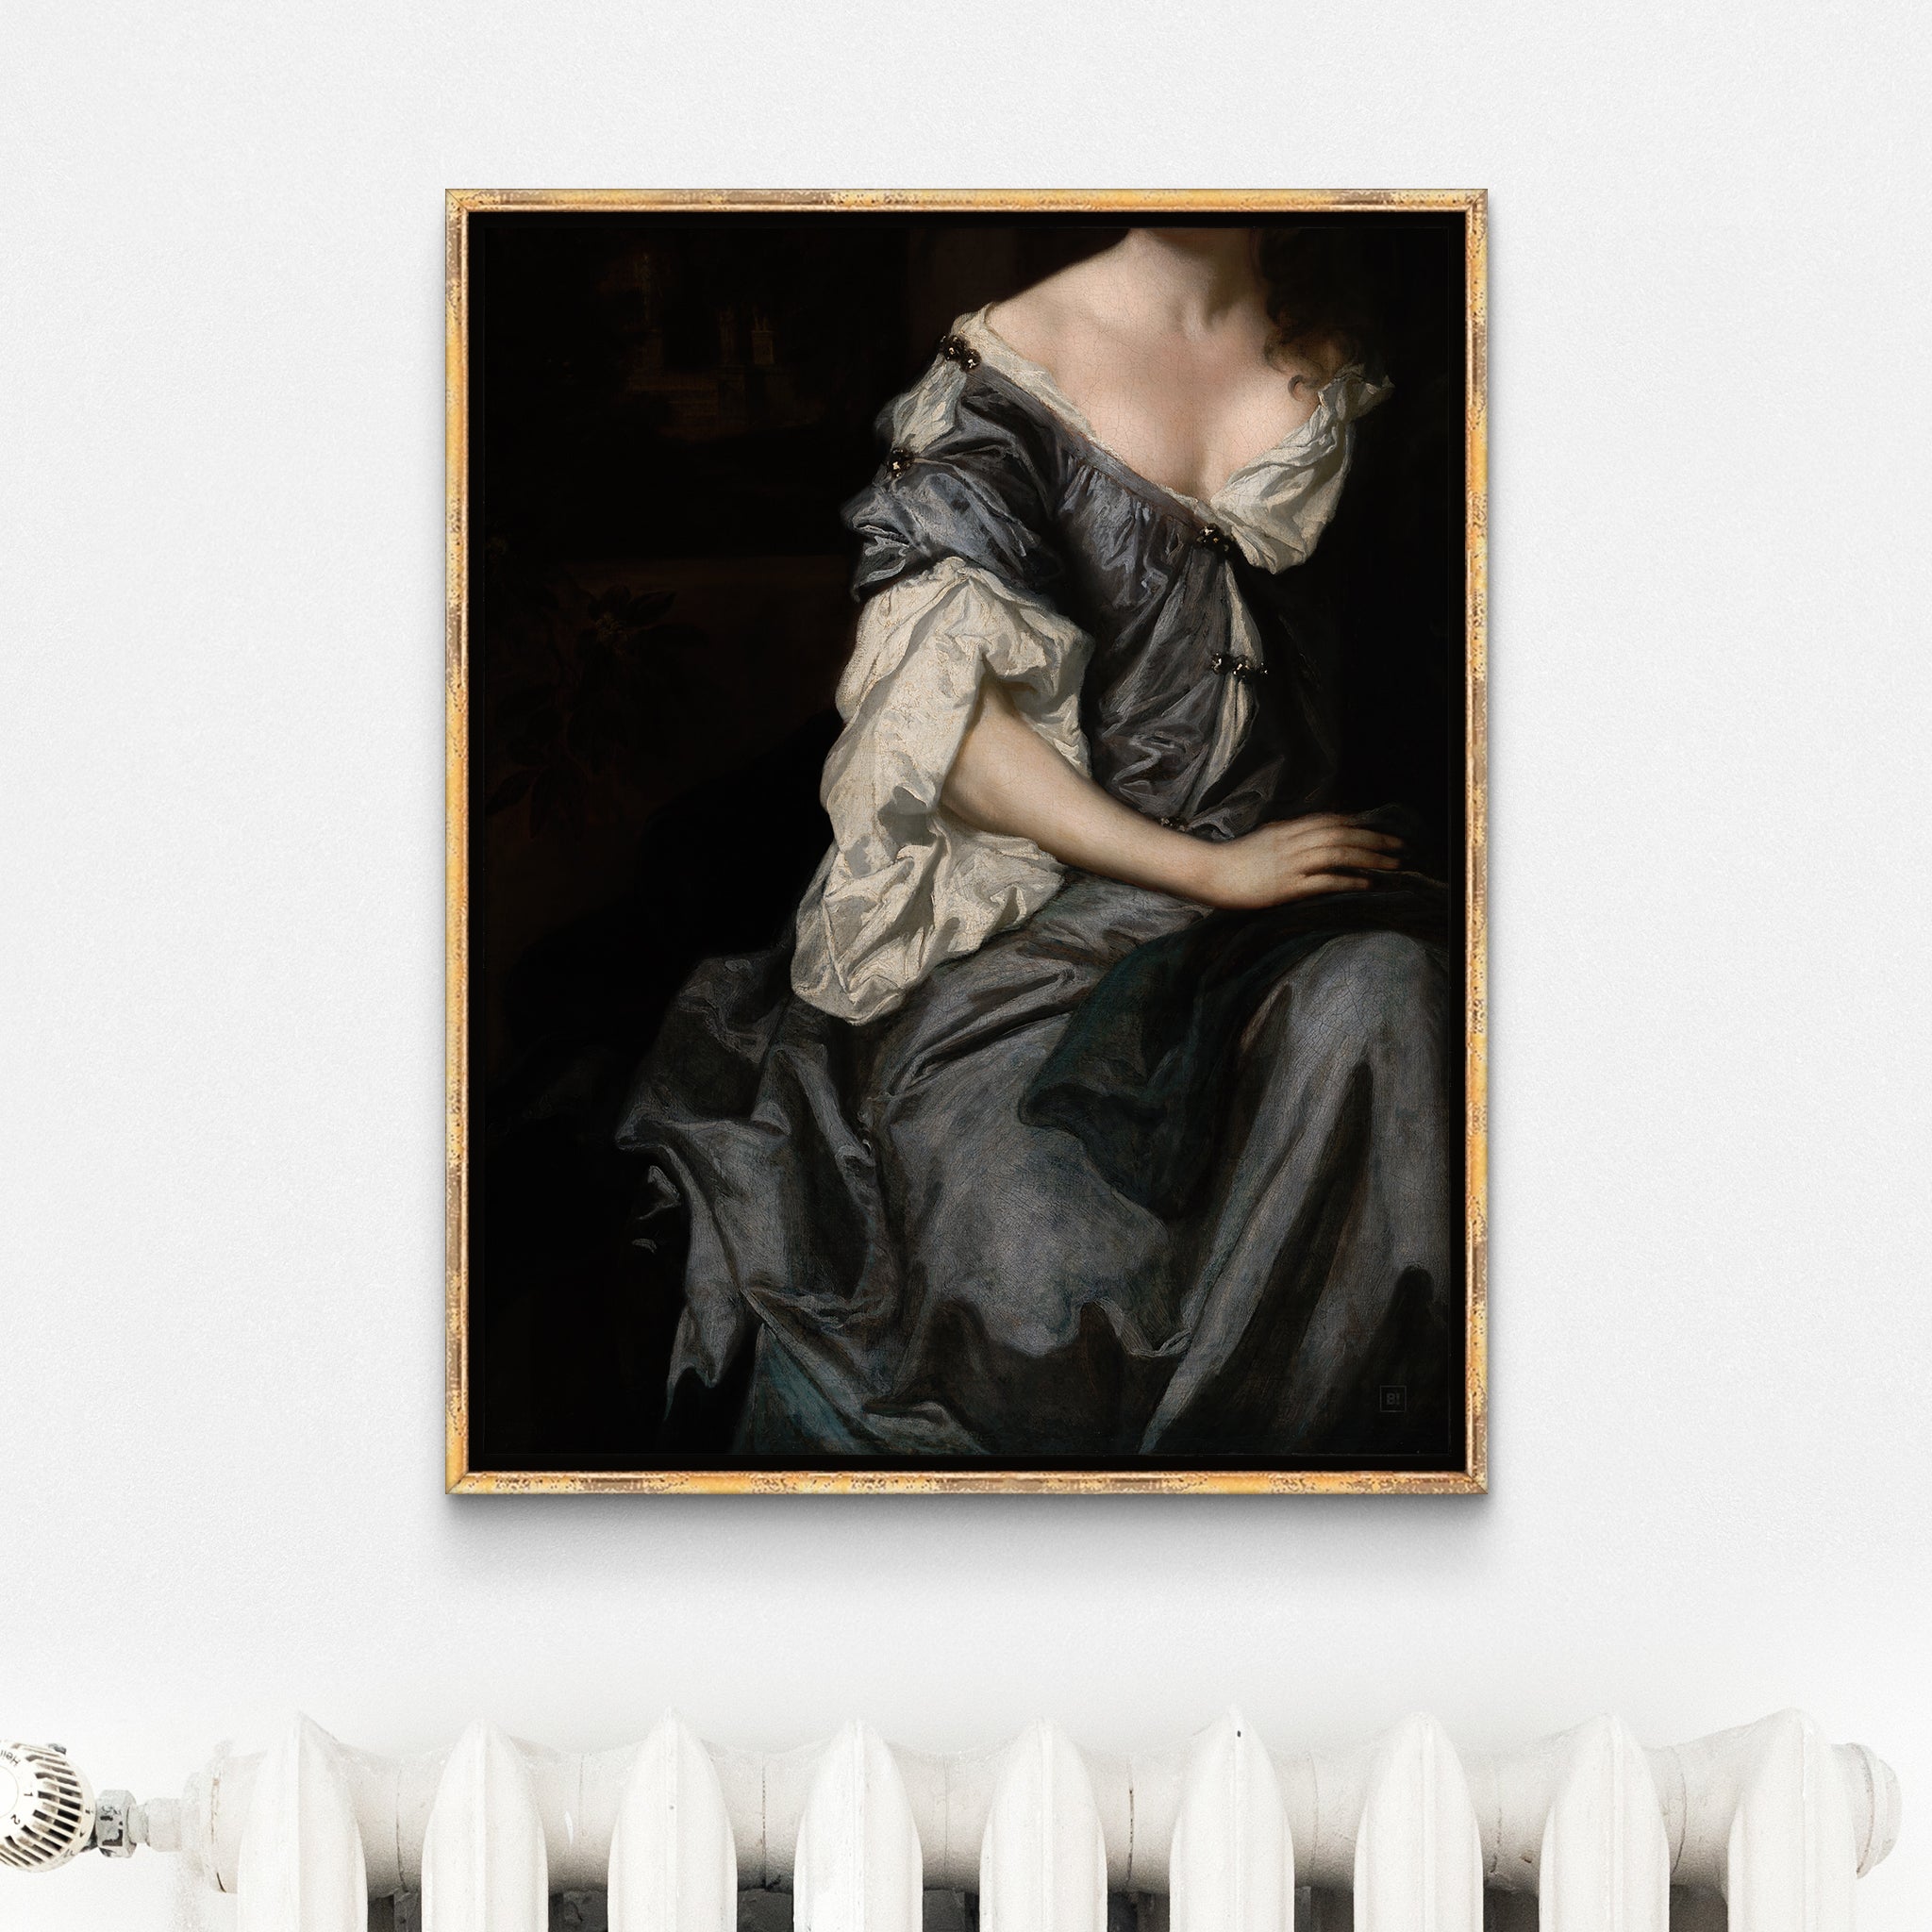 Be inspired by our altered Victorian Woman in Gray Satin Dress art print. This artwork was printed using the giclée process on archival acid-free paper and is presented in an antique gold frame that captures its timeless beauty in every detail.